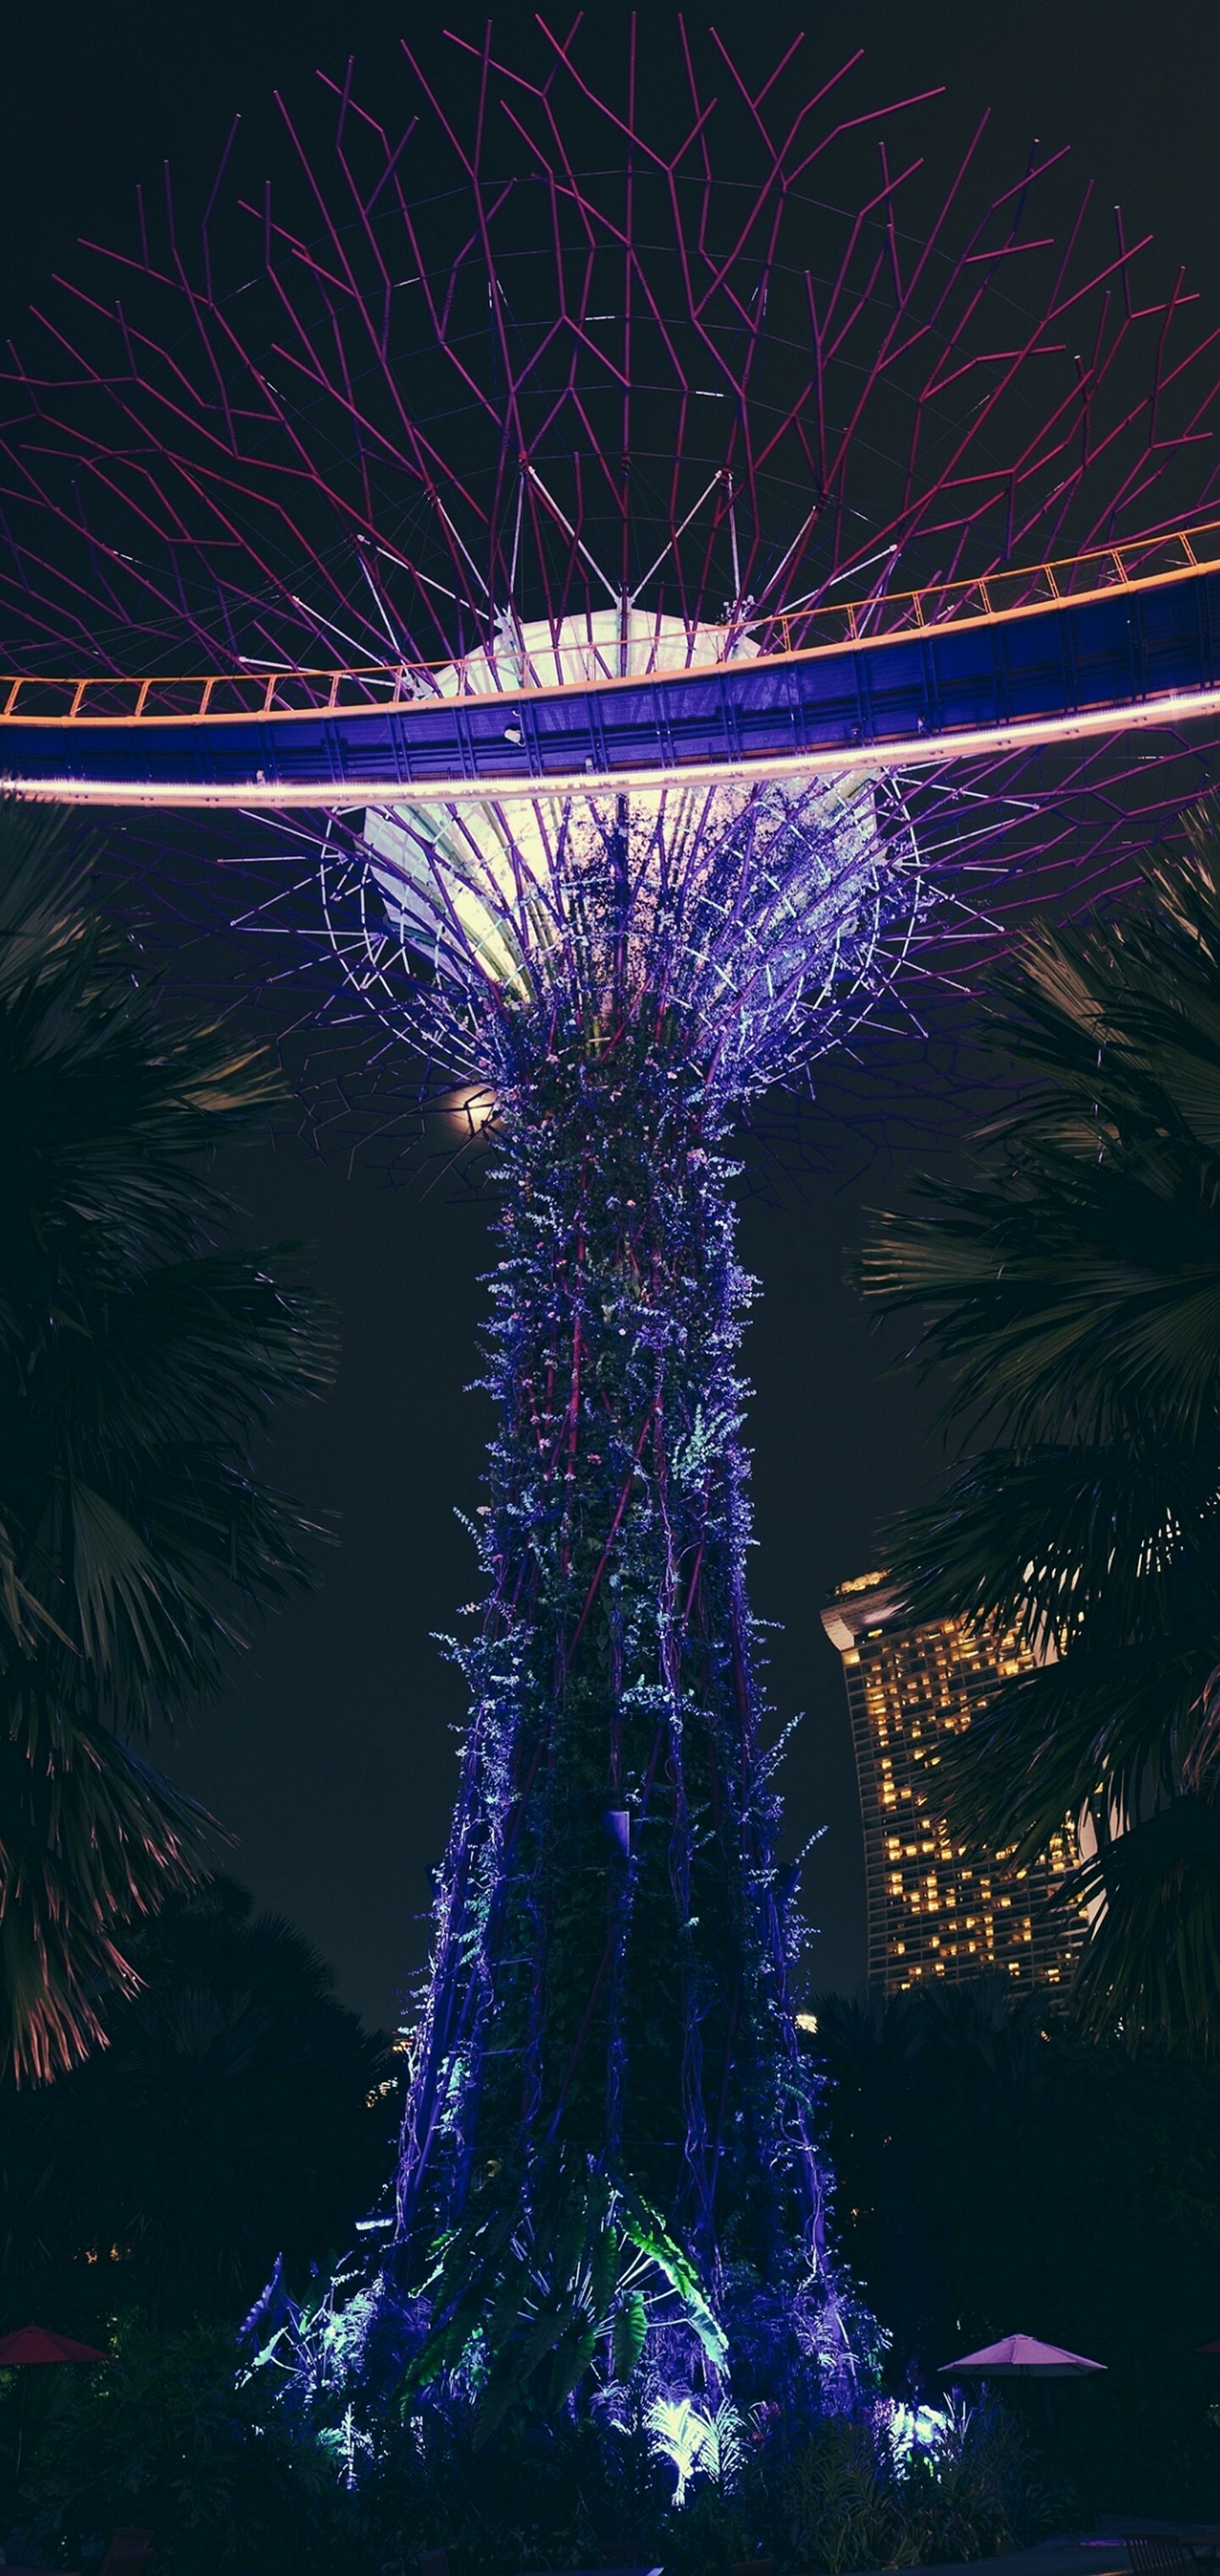 Singapore: Supertree Grove, Gardens by the Bay, One of the most iconic and recognizable attractions. 1440x3040 HD Background.